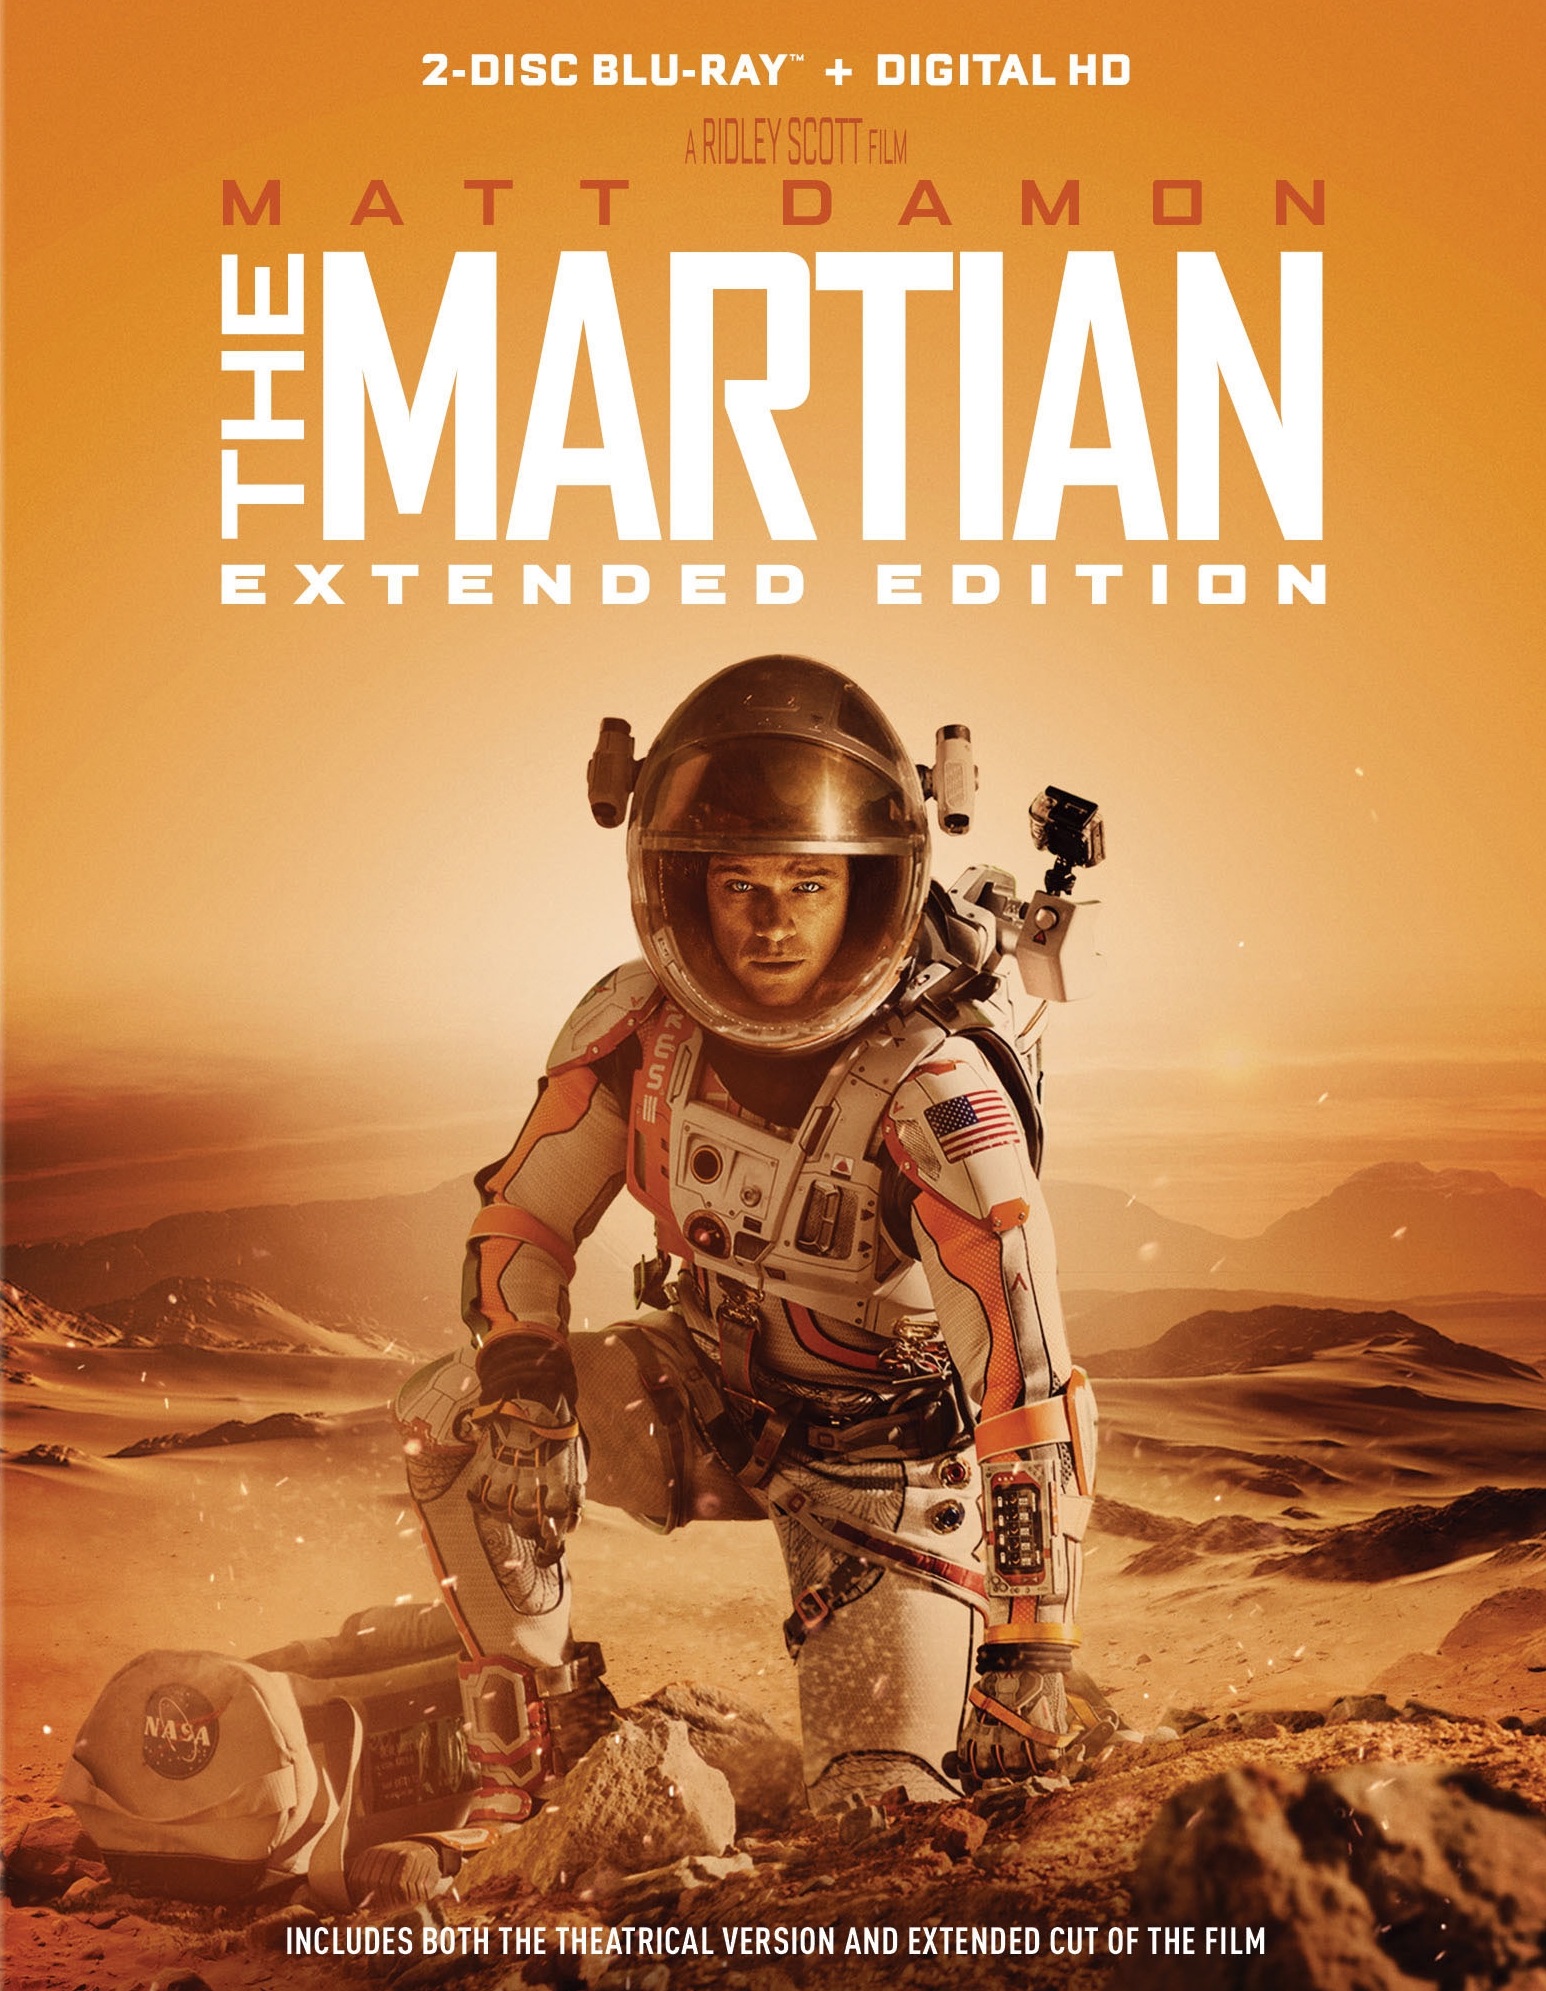 The Martian [Extended Edition] [Blu-ray] [2 Discs] [2015] - Best Buy